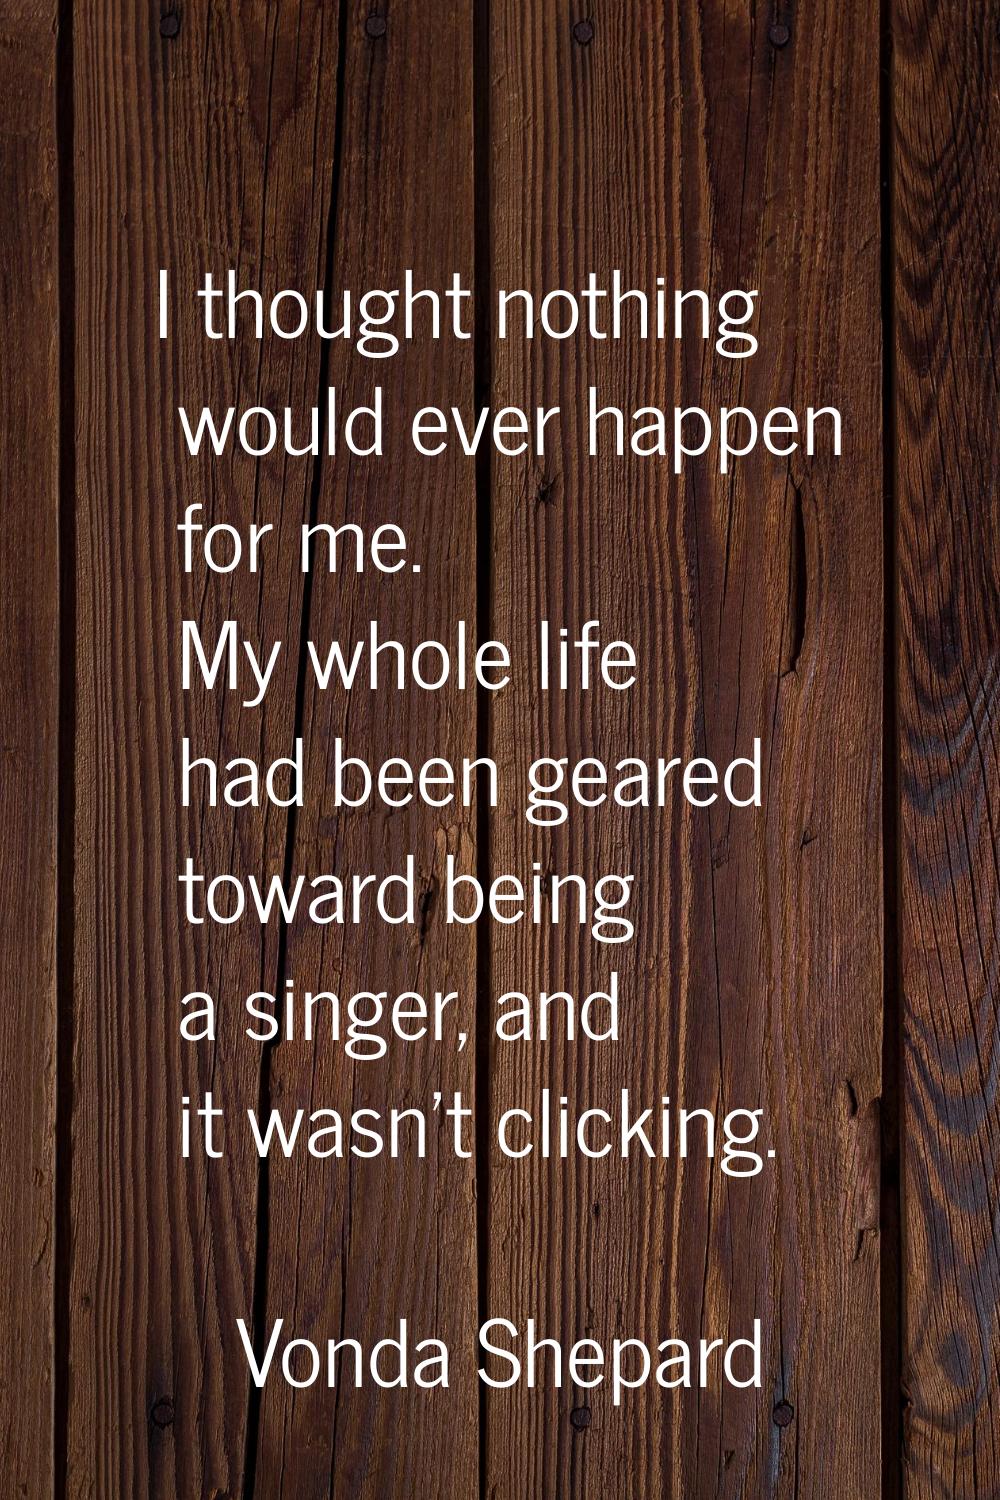 I thought nothing would ever happen for me. My whole life had been geared toward being a singer, an